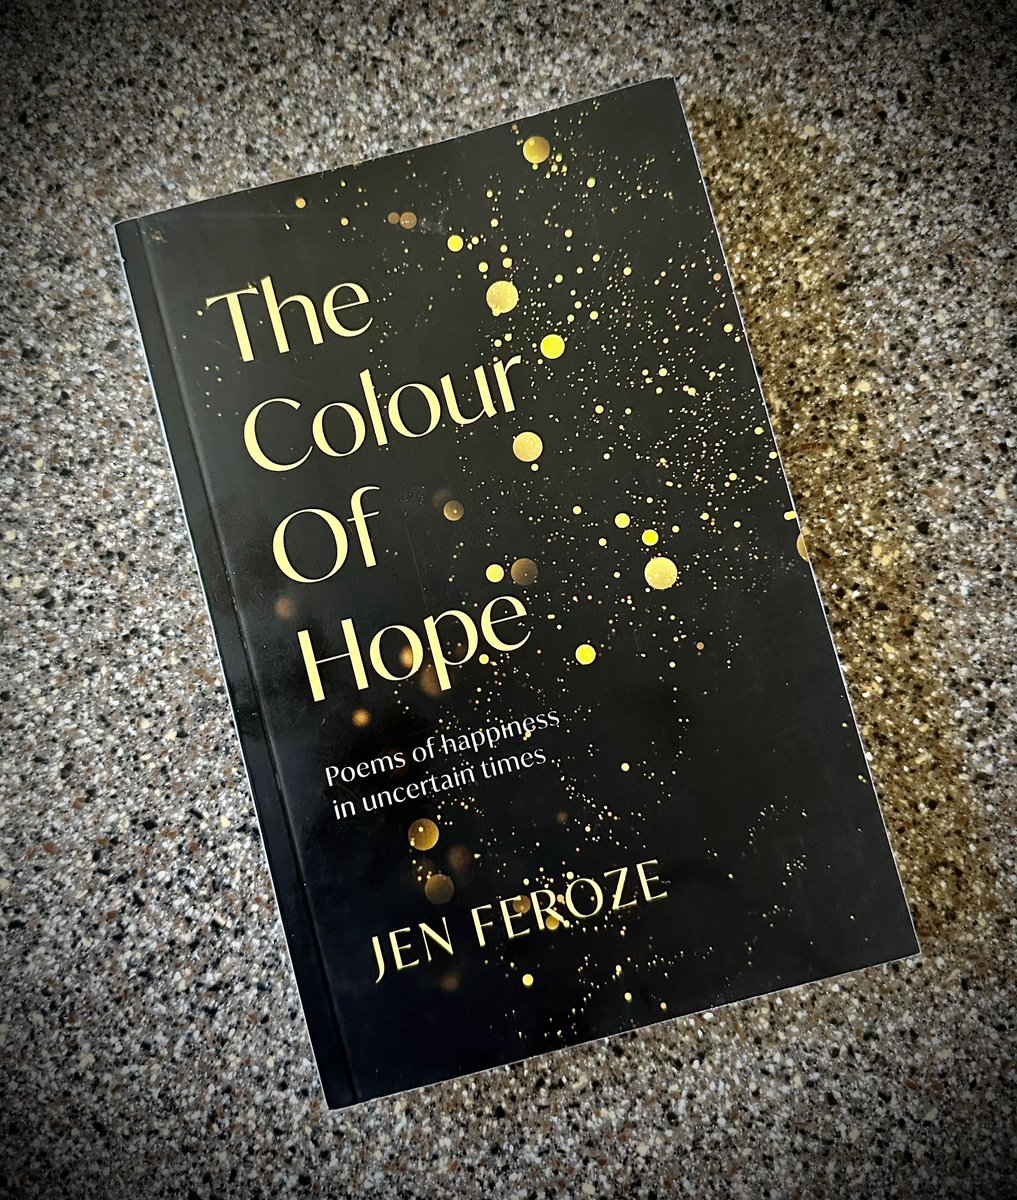 Thrilled for a great poetry post day in time for the weekend. I can’t wait to explore The Colour Of Hope by Jen Feroze @jenlareine, published by Troubadour Publishing. Check it out if you have the chance!